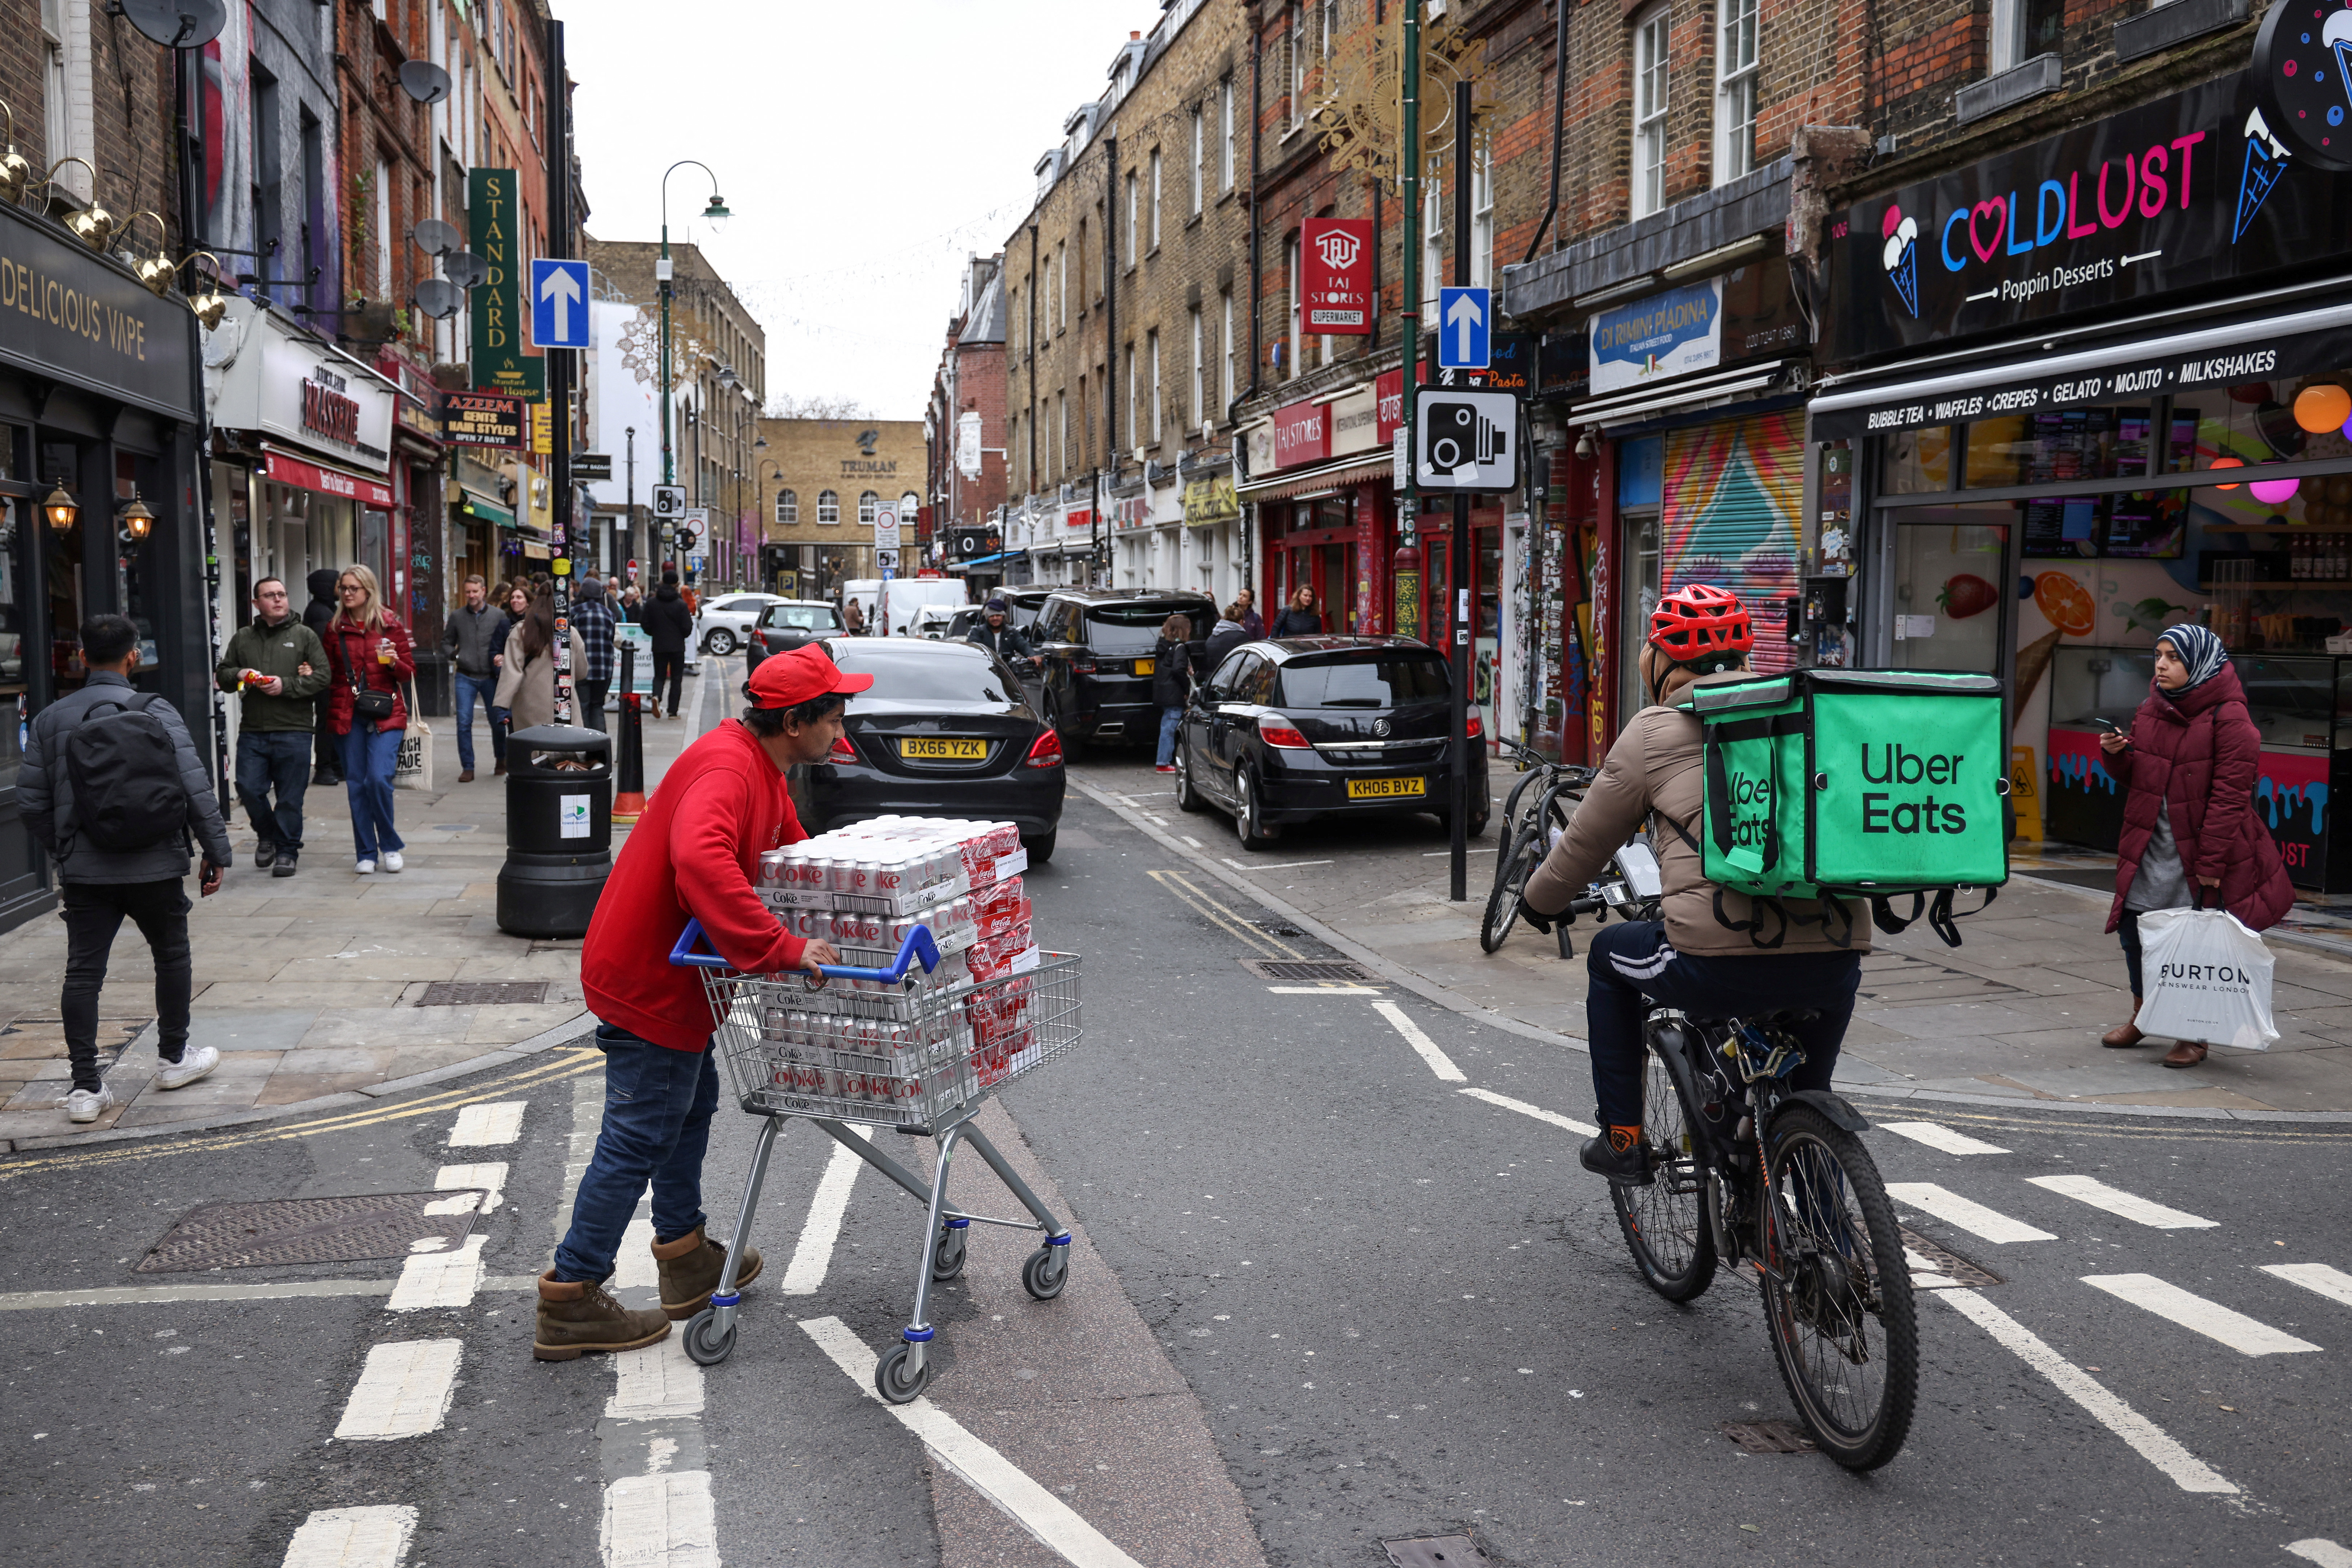 A man pushes a trolly of Coke cans in Brick Lane in London